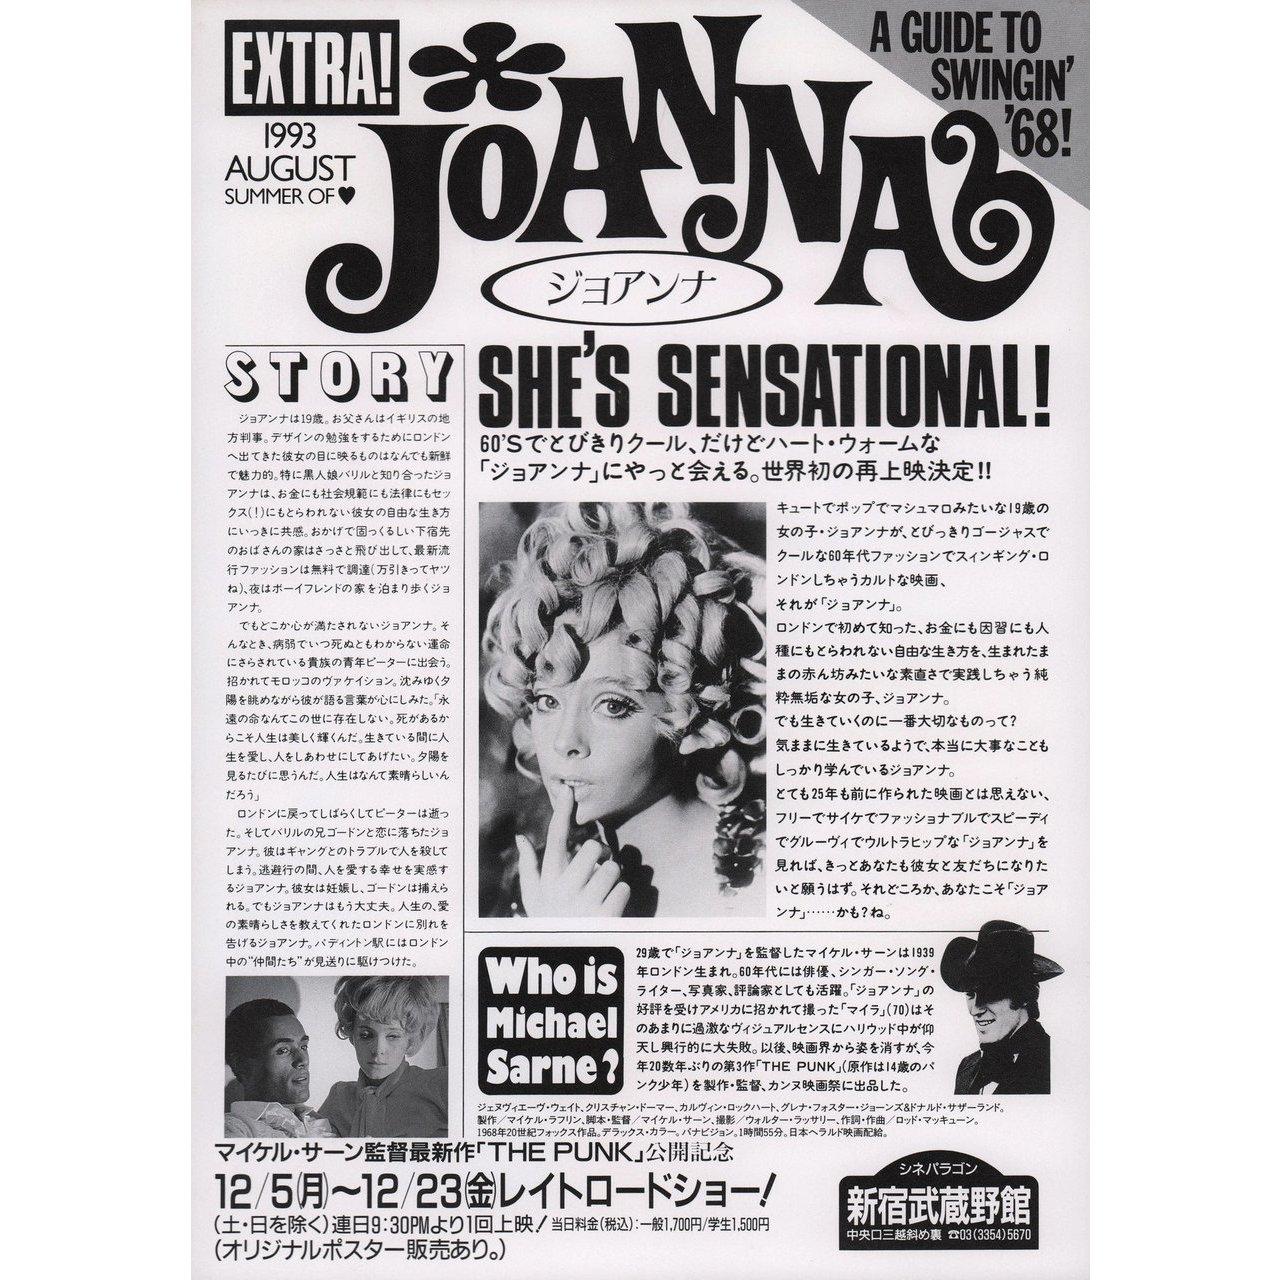 Original 1993 re-release Japanese B5 chirashi flyer by Roy Lichtenstein / Mike Sarne for the 1968 film Joanna directed by Michael Sarne with Genevieve Waite / Christian Doermer / Calvin Lockhart / Donald Sutherland. Fine condition, rolled. Please